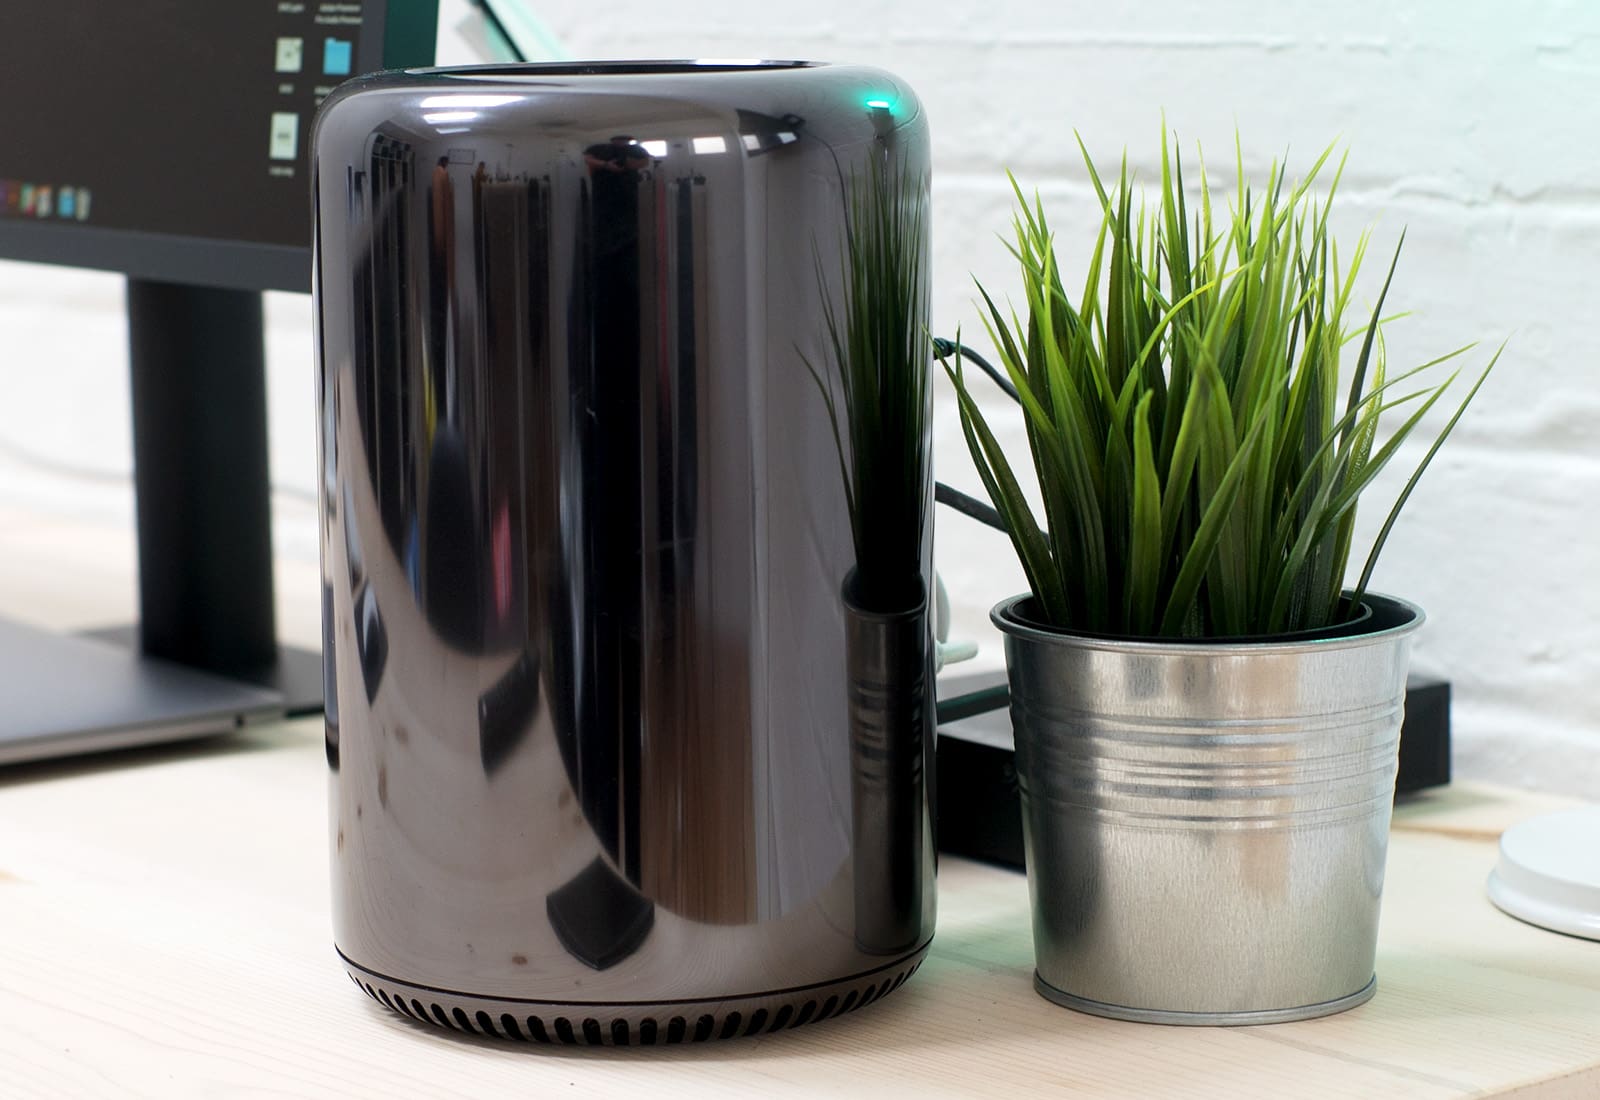 The Mac Pro is being 